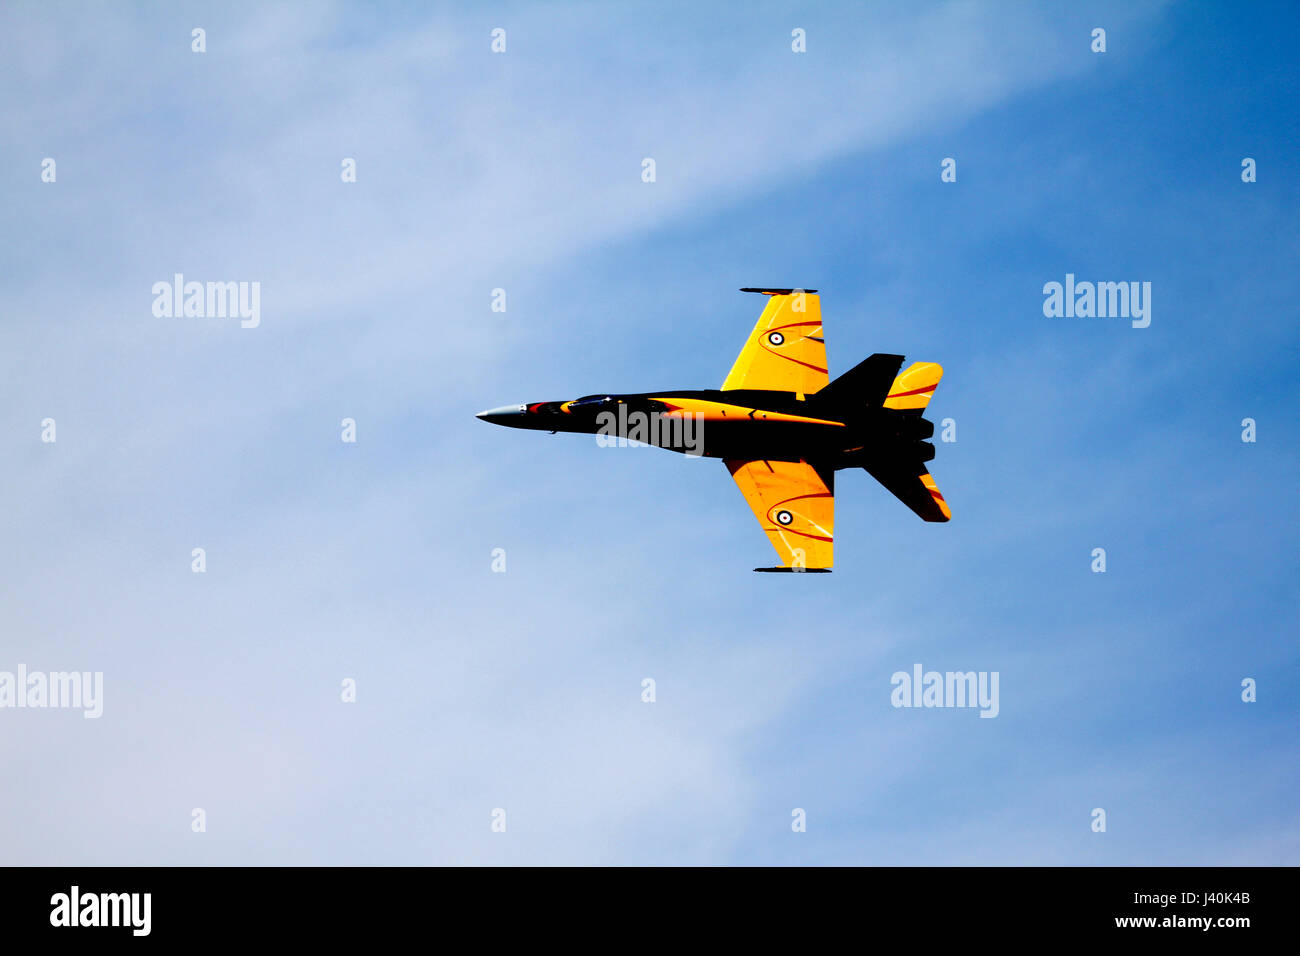 Very loud fast jet doing a display of skills during a Canadian airshow. Stock Photo